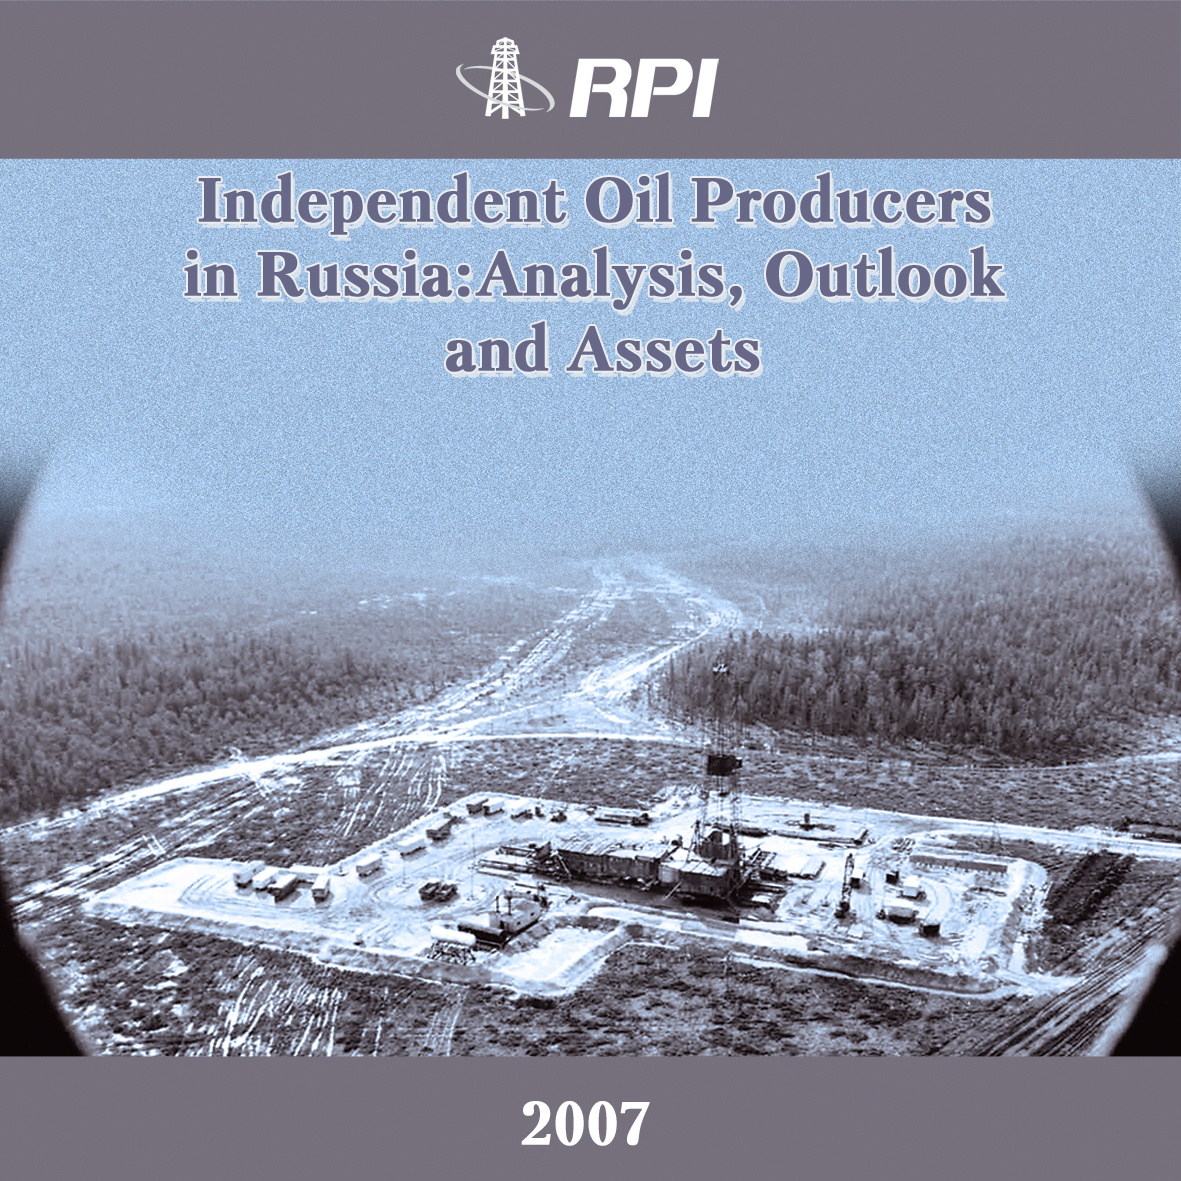 Independent Oil Producers in Russia: Analysis, Outlook and Assets